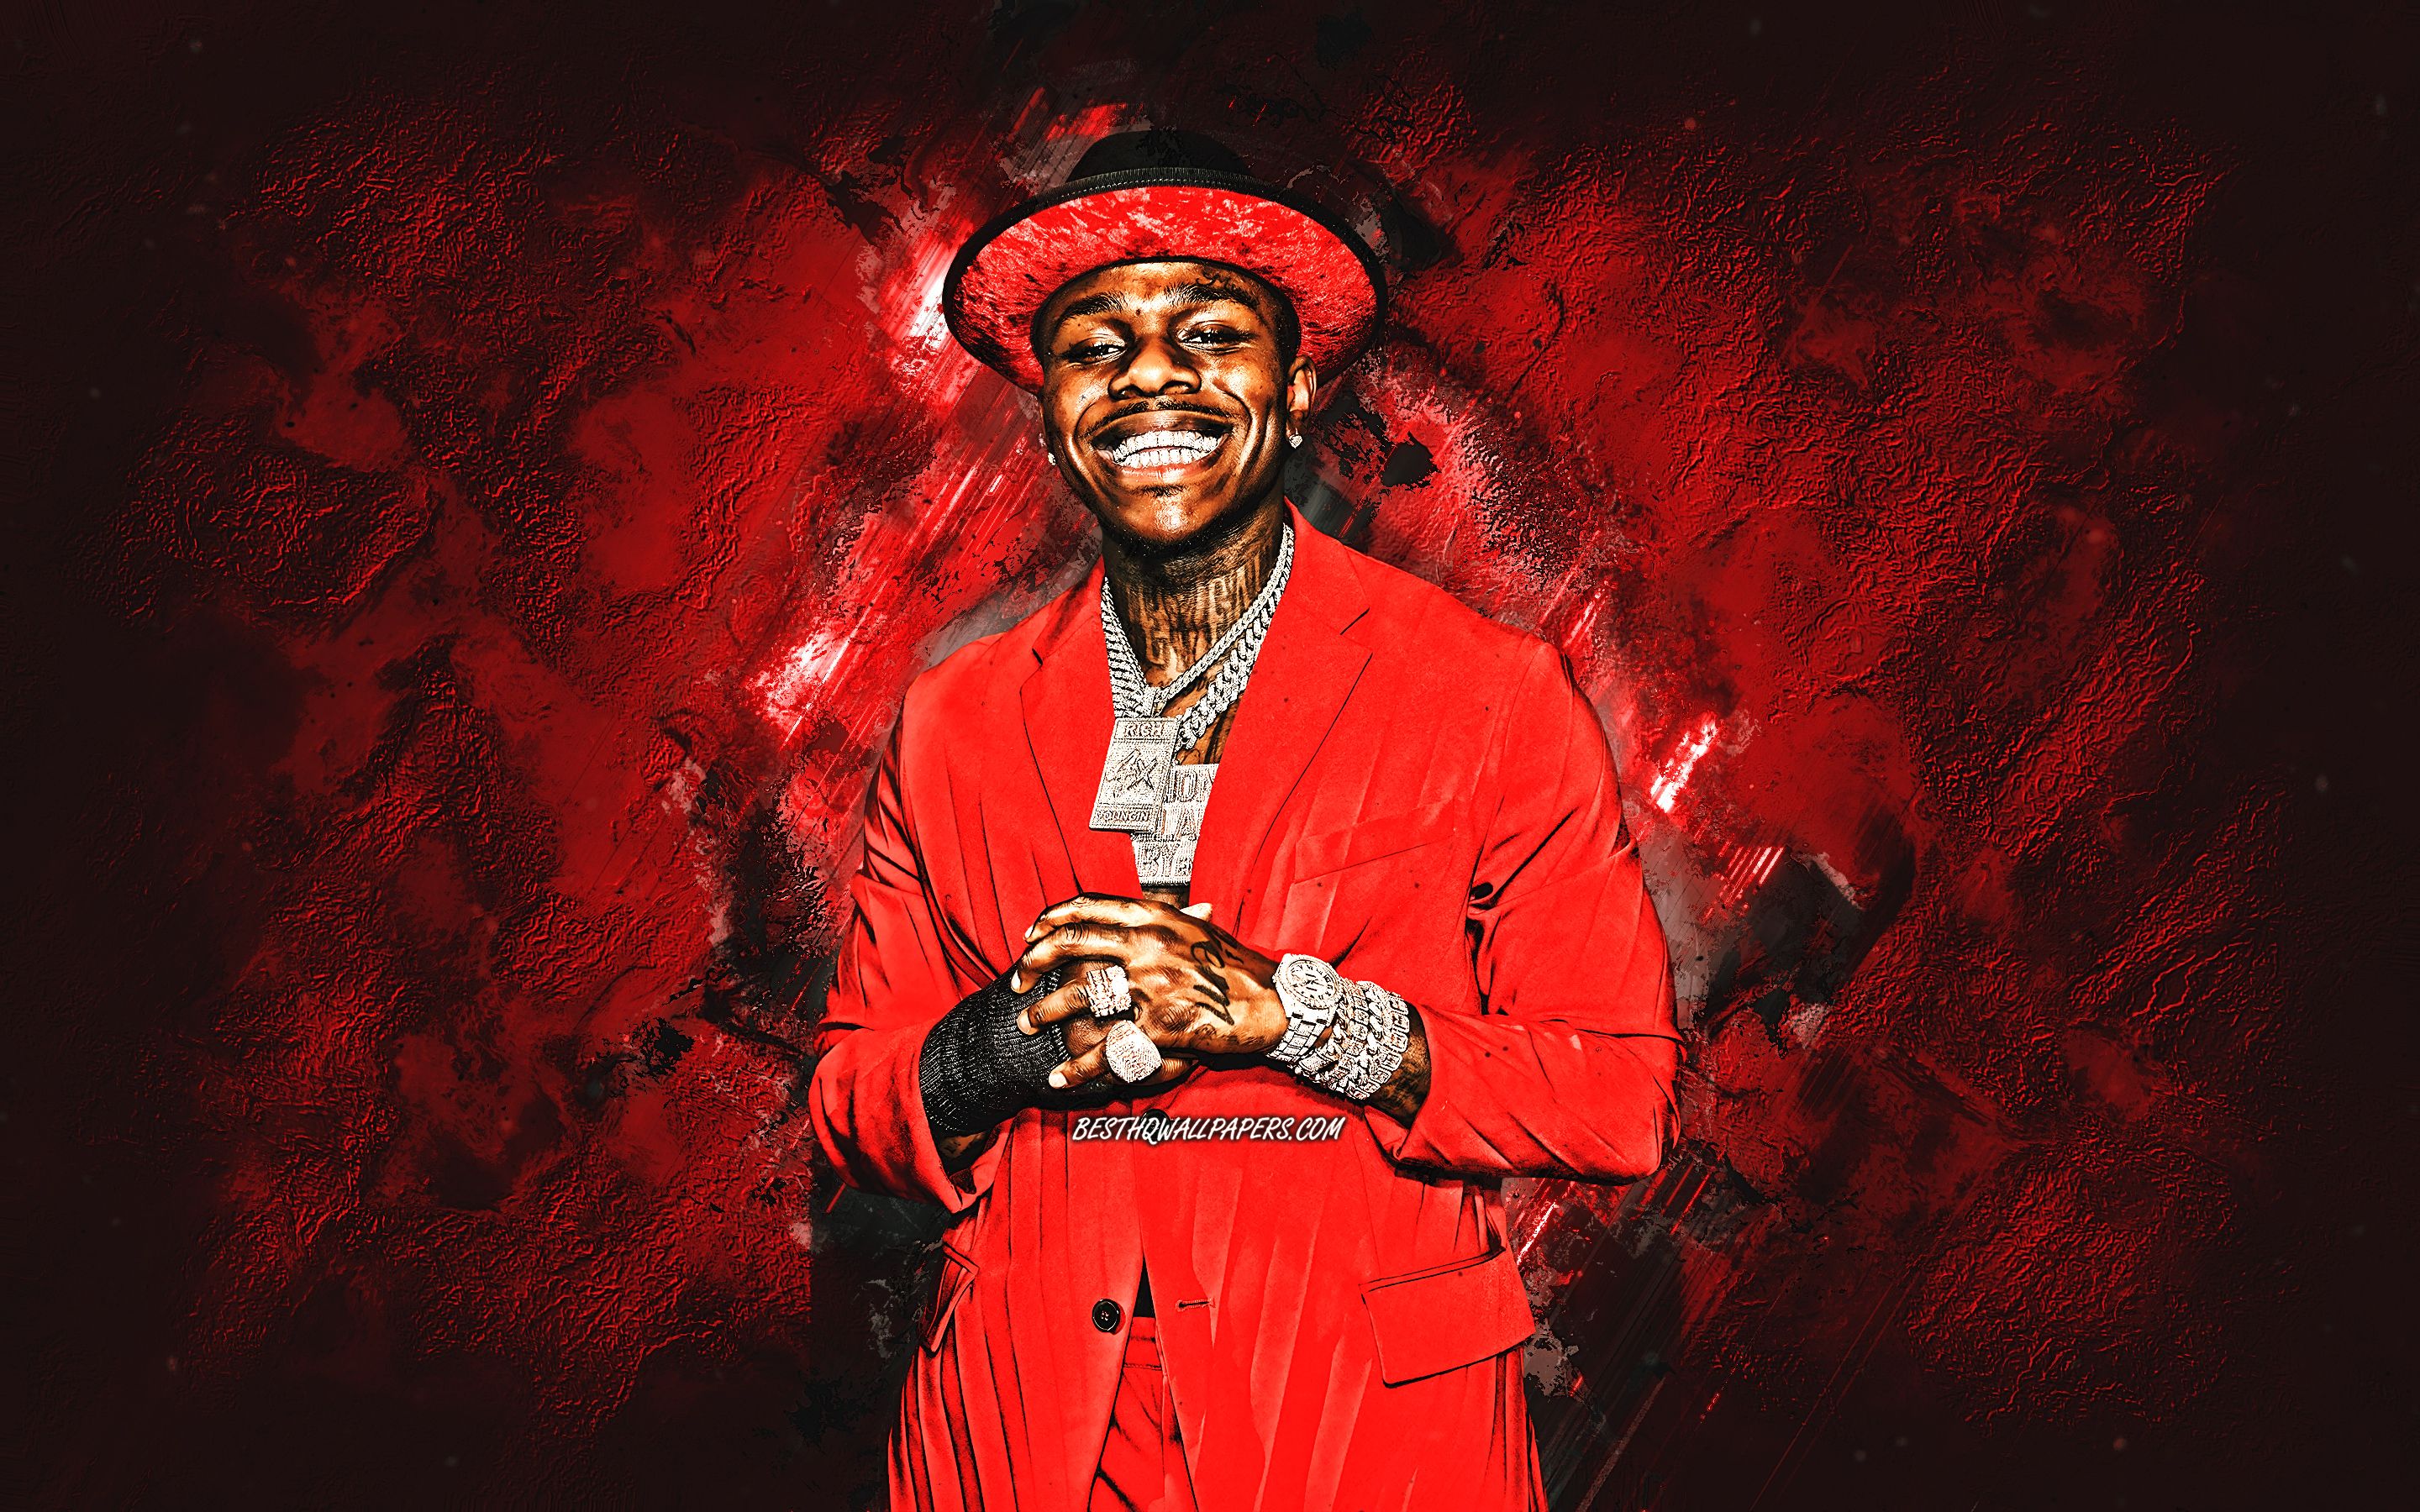 Download wallpaper DaBaby, american rapper, portrait, Jonathan Lyndale Kirk, red stone background, popular singers for desktop with resolution 2880x1800. High Quality HD picture wallpaper